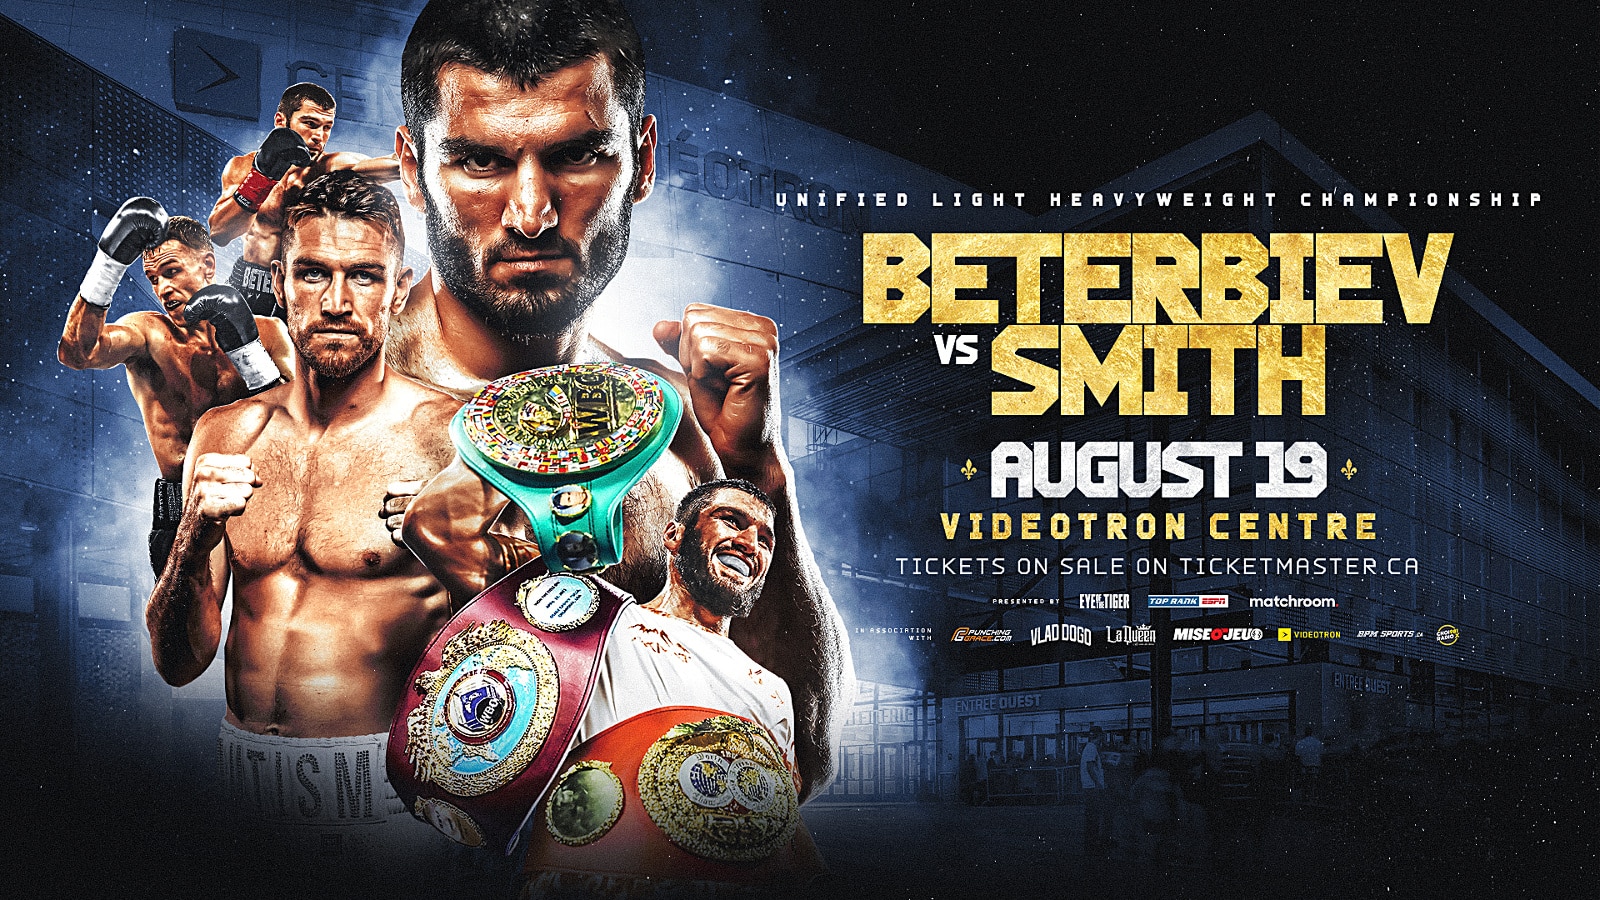 Image: Artur Beterbiev vs. Callum Smith first face-off for August 19 fight in Quebec City